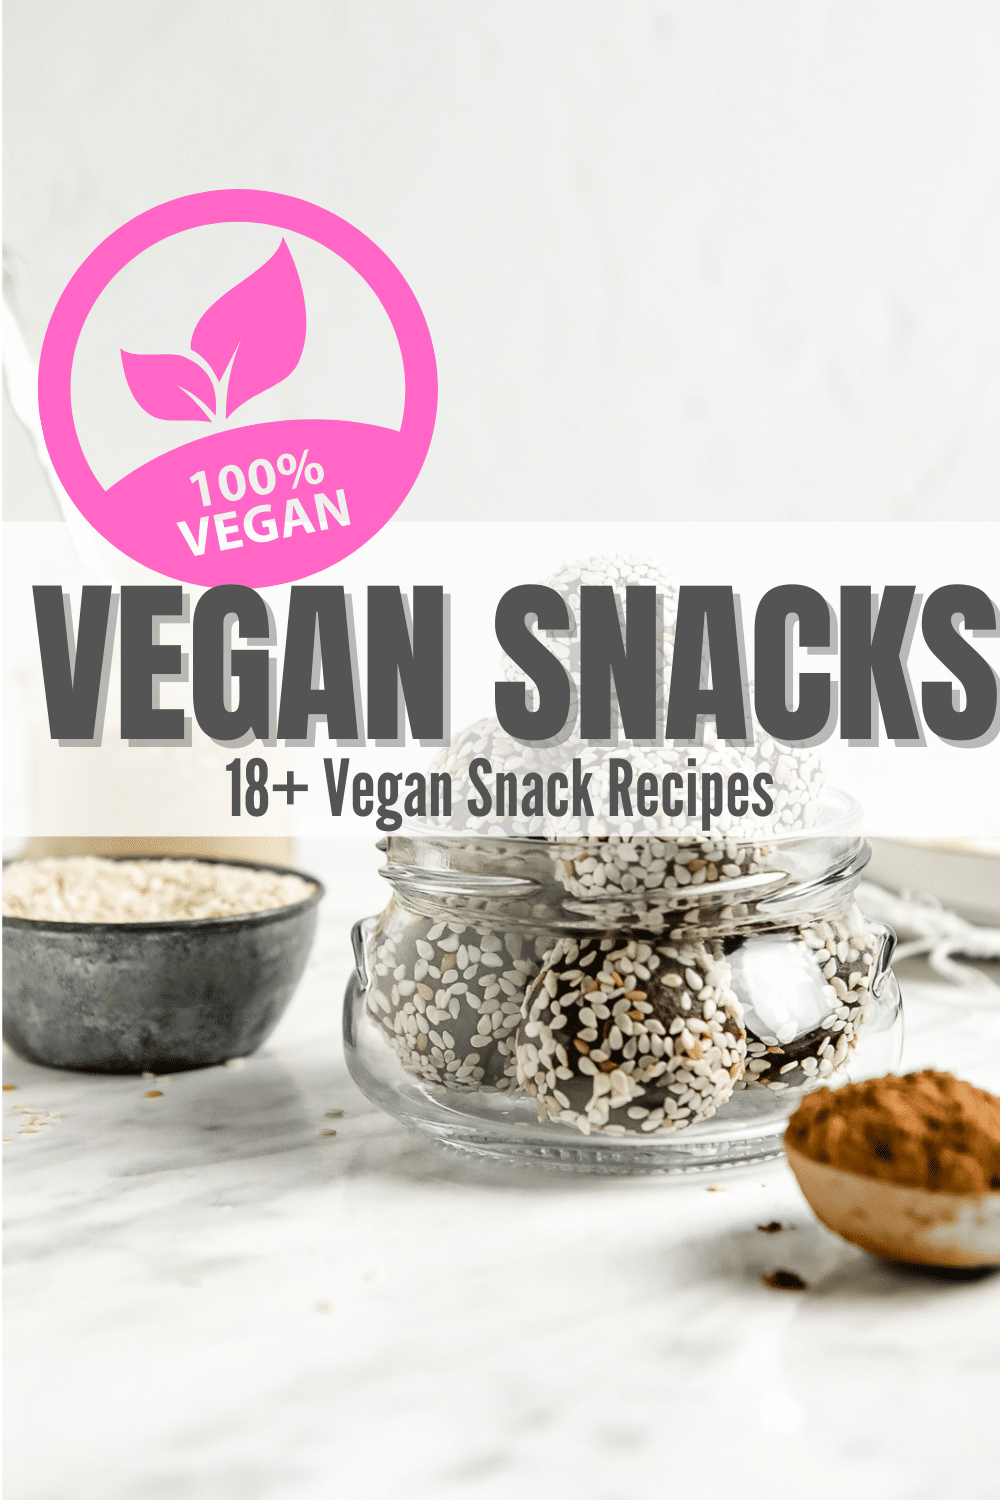 Need more ideas for vegan snacks? From healthy vegan snacks to sweet vegan treats, I have tons of ideas to fight hunger throughout the day! Read on to learn how to make over 18+ vegan snacks.